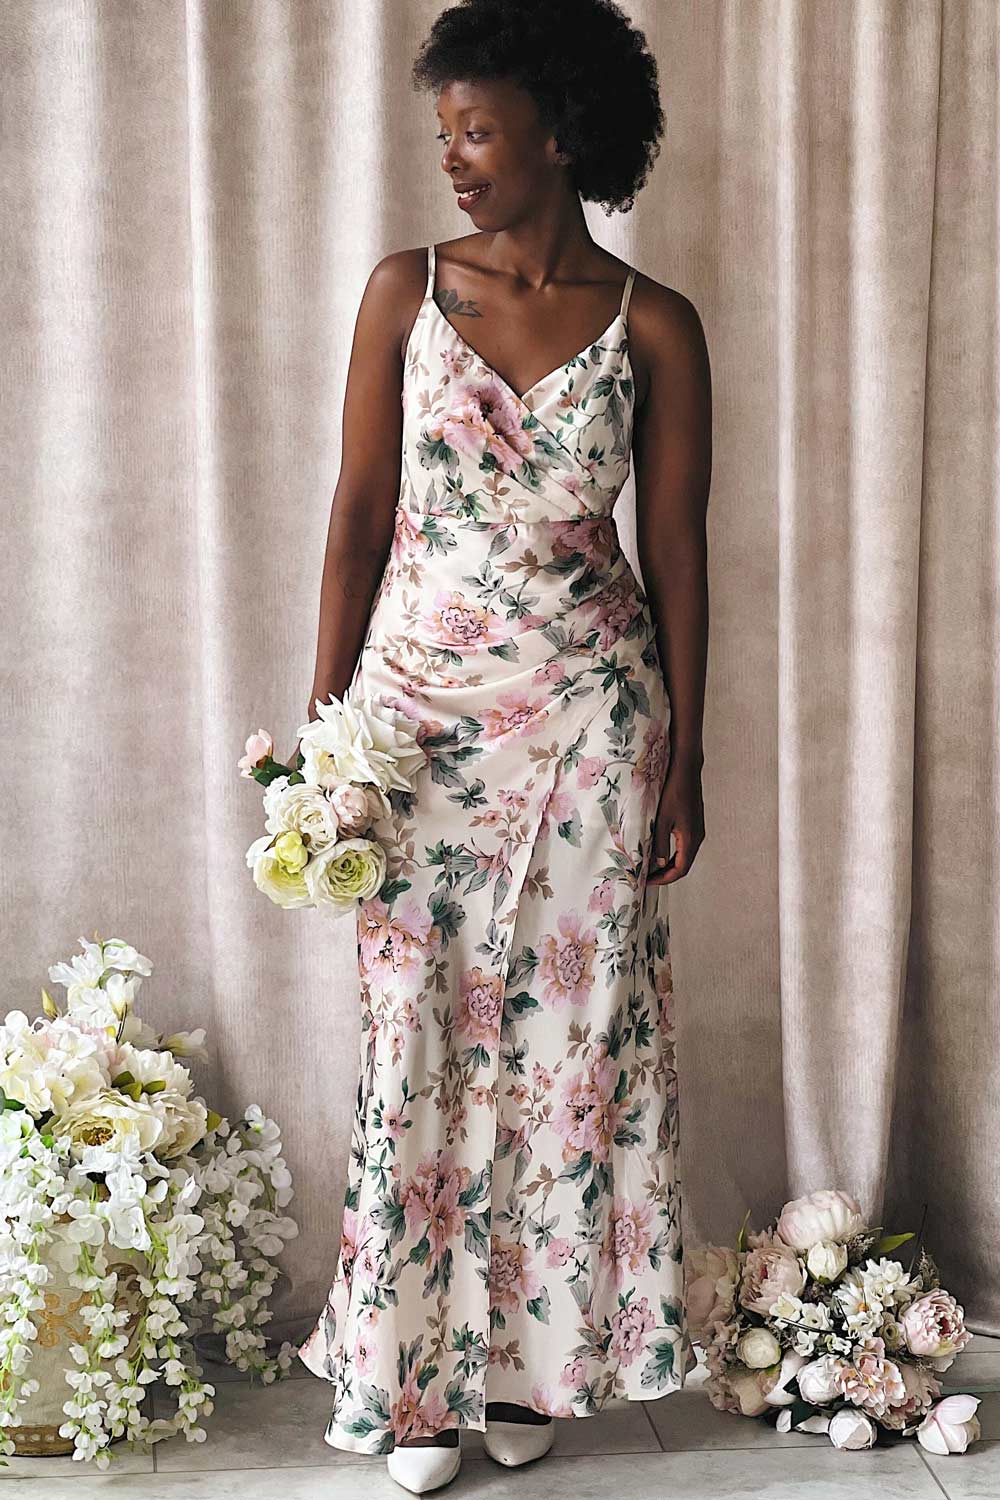 Joulanne | Floral Maxi Dress with High Slit- Boutique 1861 on model full length